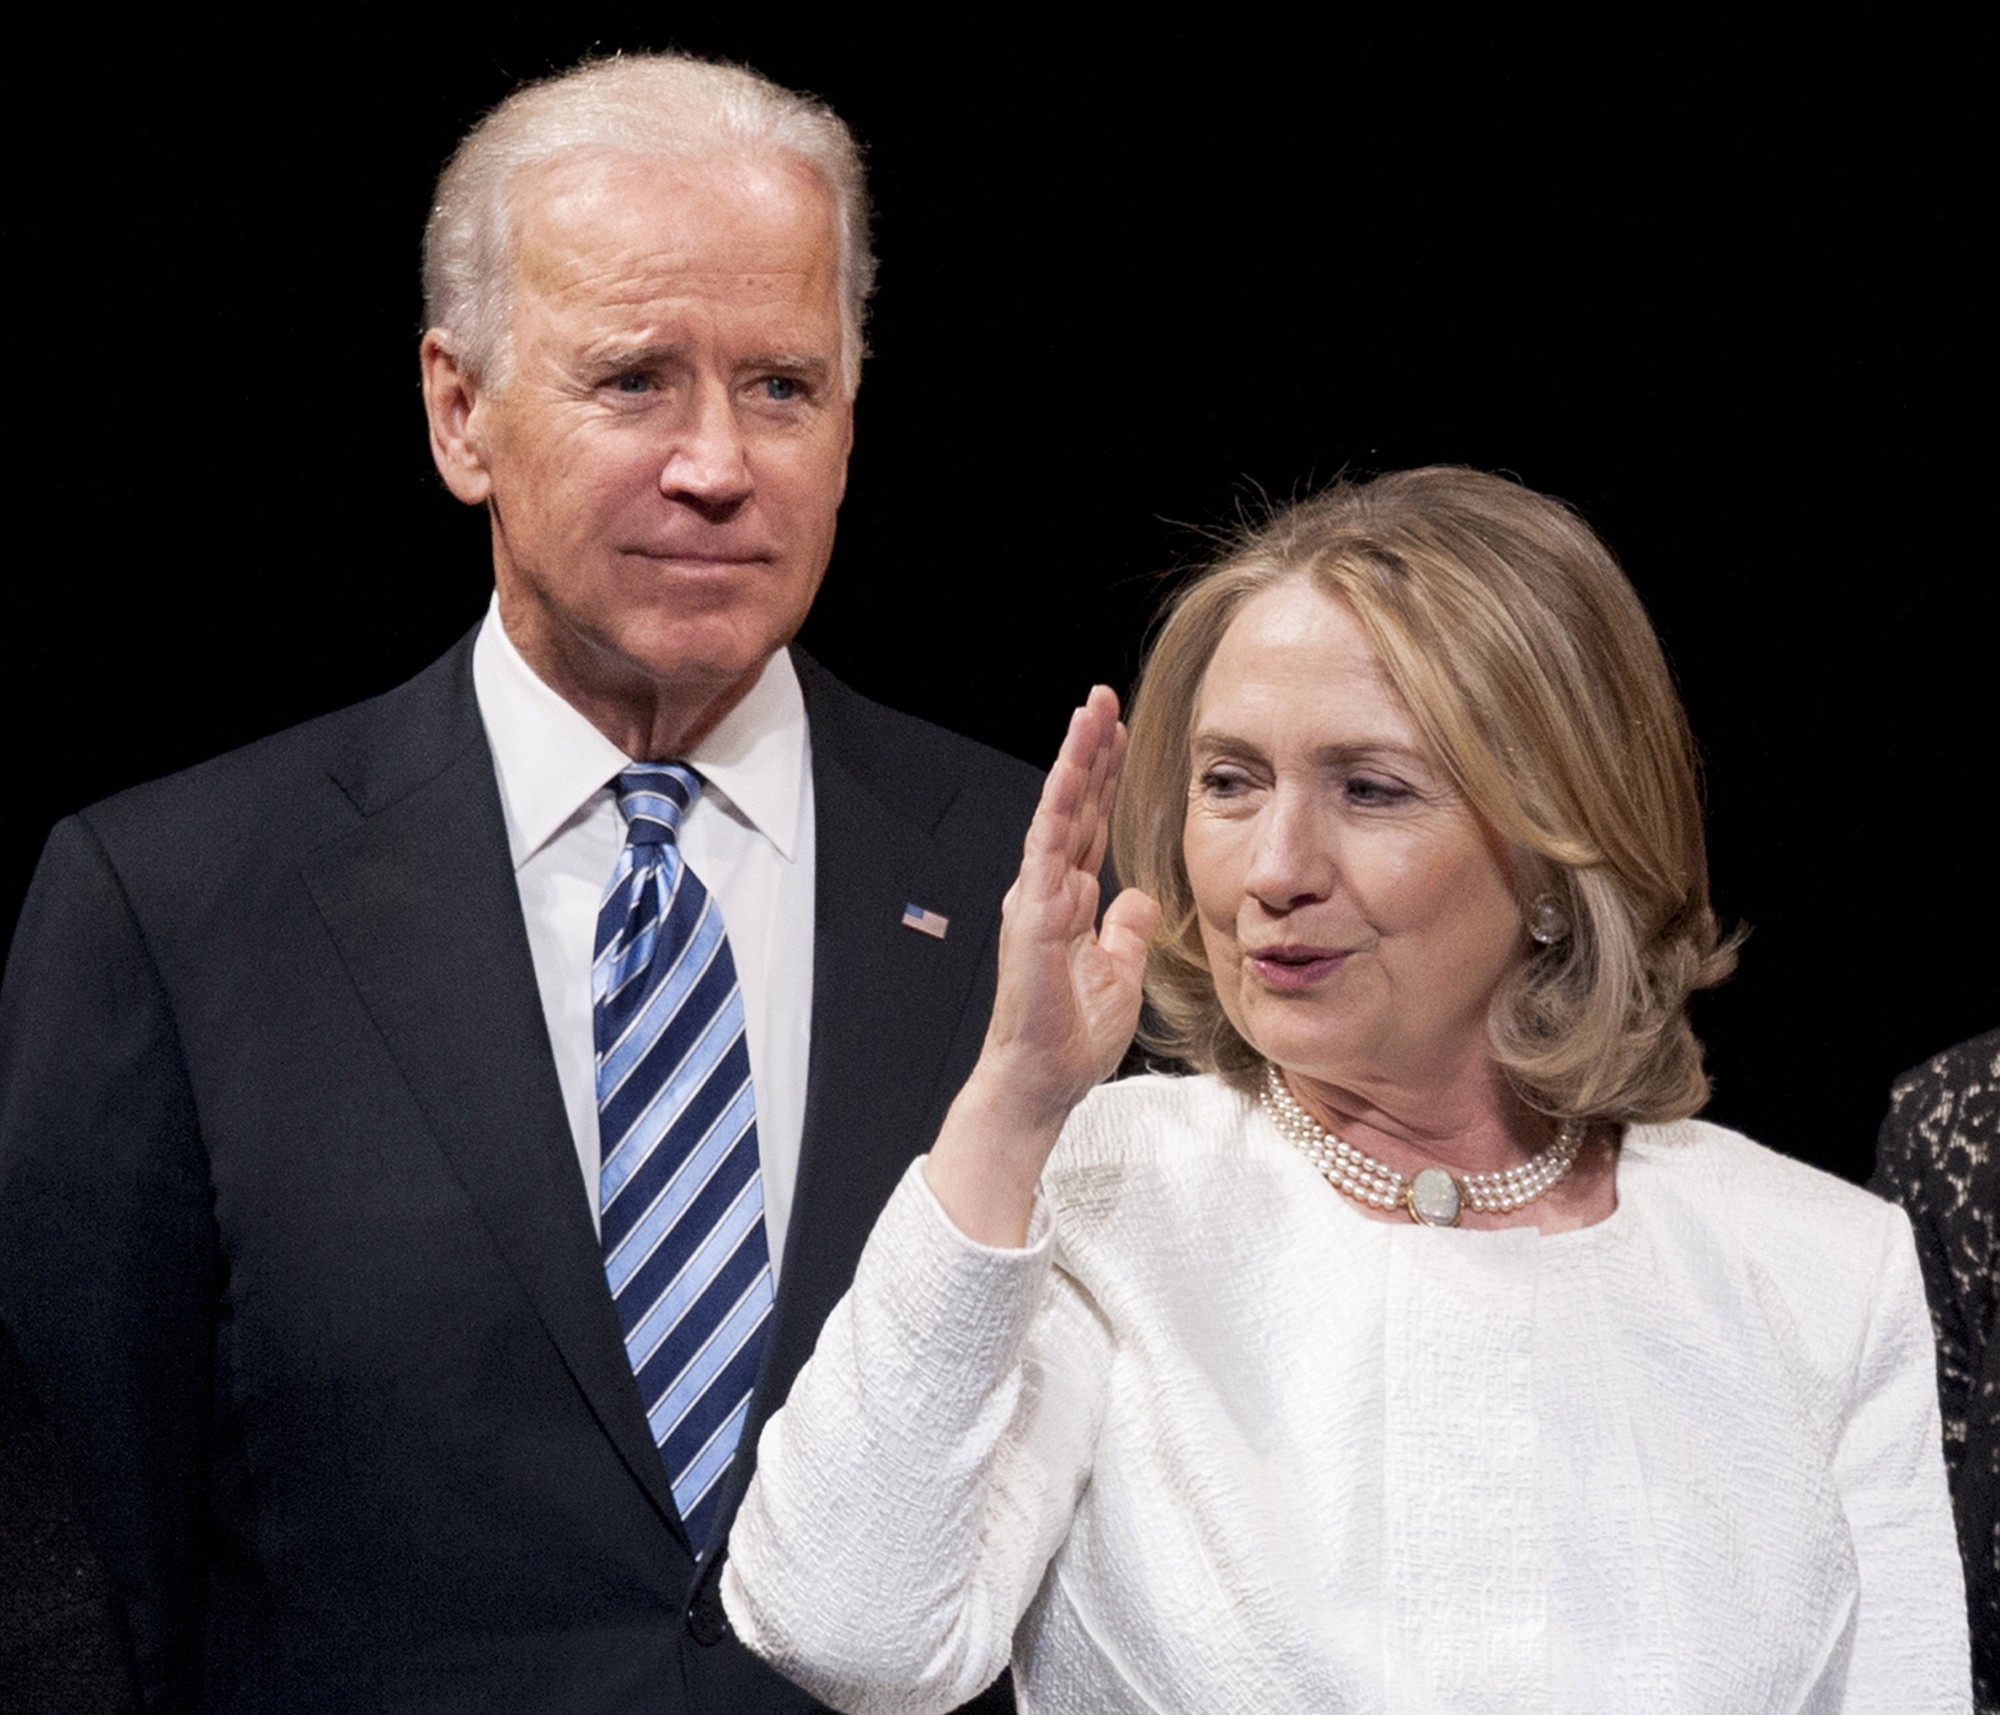 Vice President Joe Biden and former Secretary of State Hillary Rodham Clinton appear onstage at the Kennedy Center for the Performing Arts in Washington.